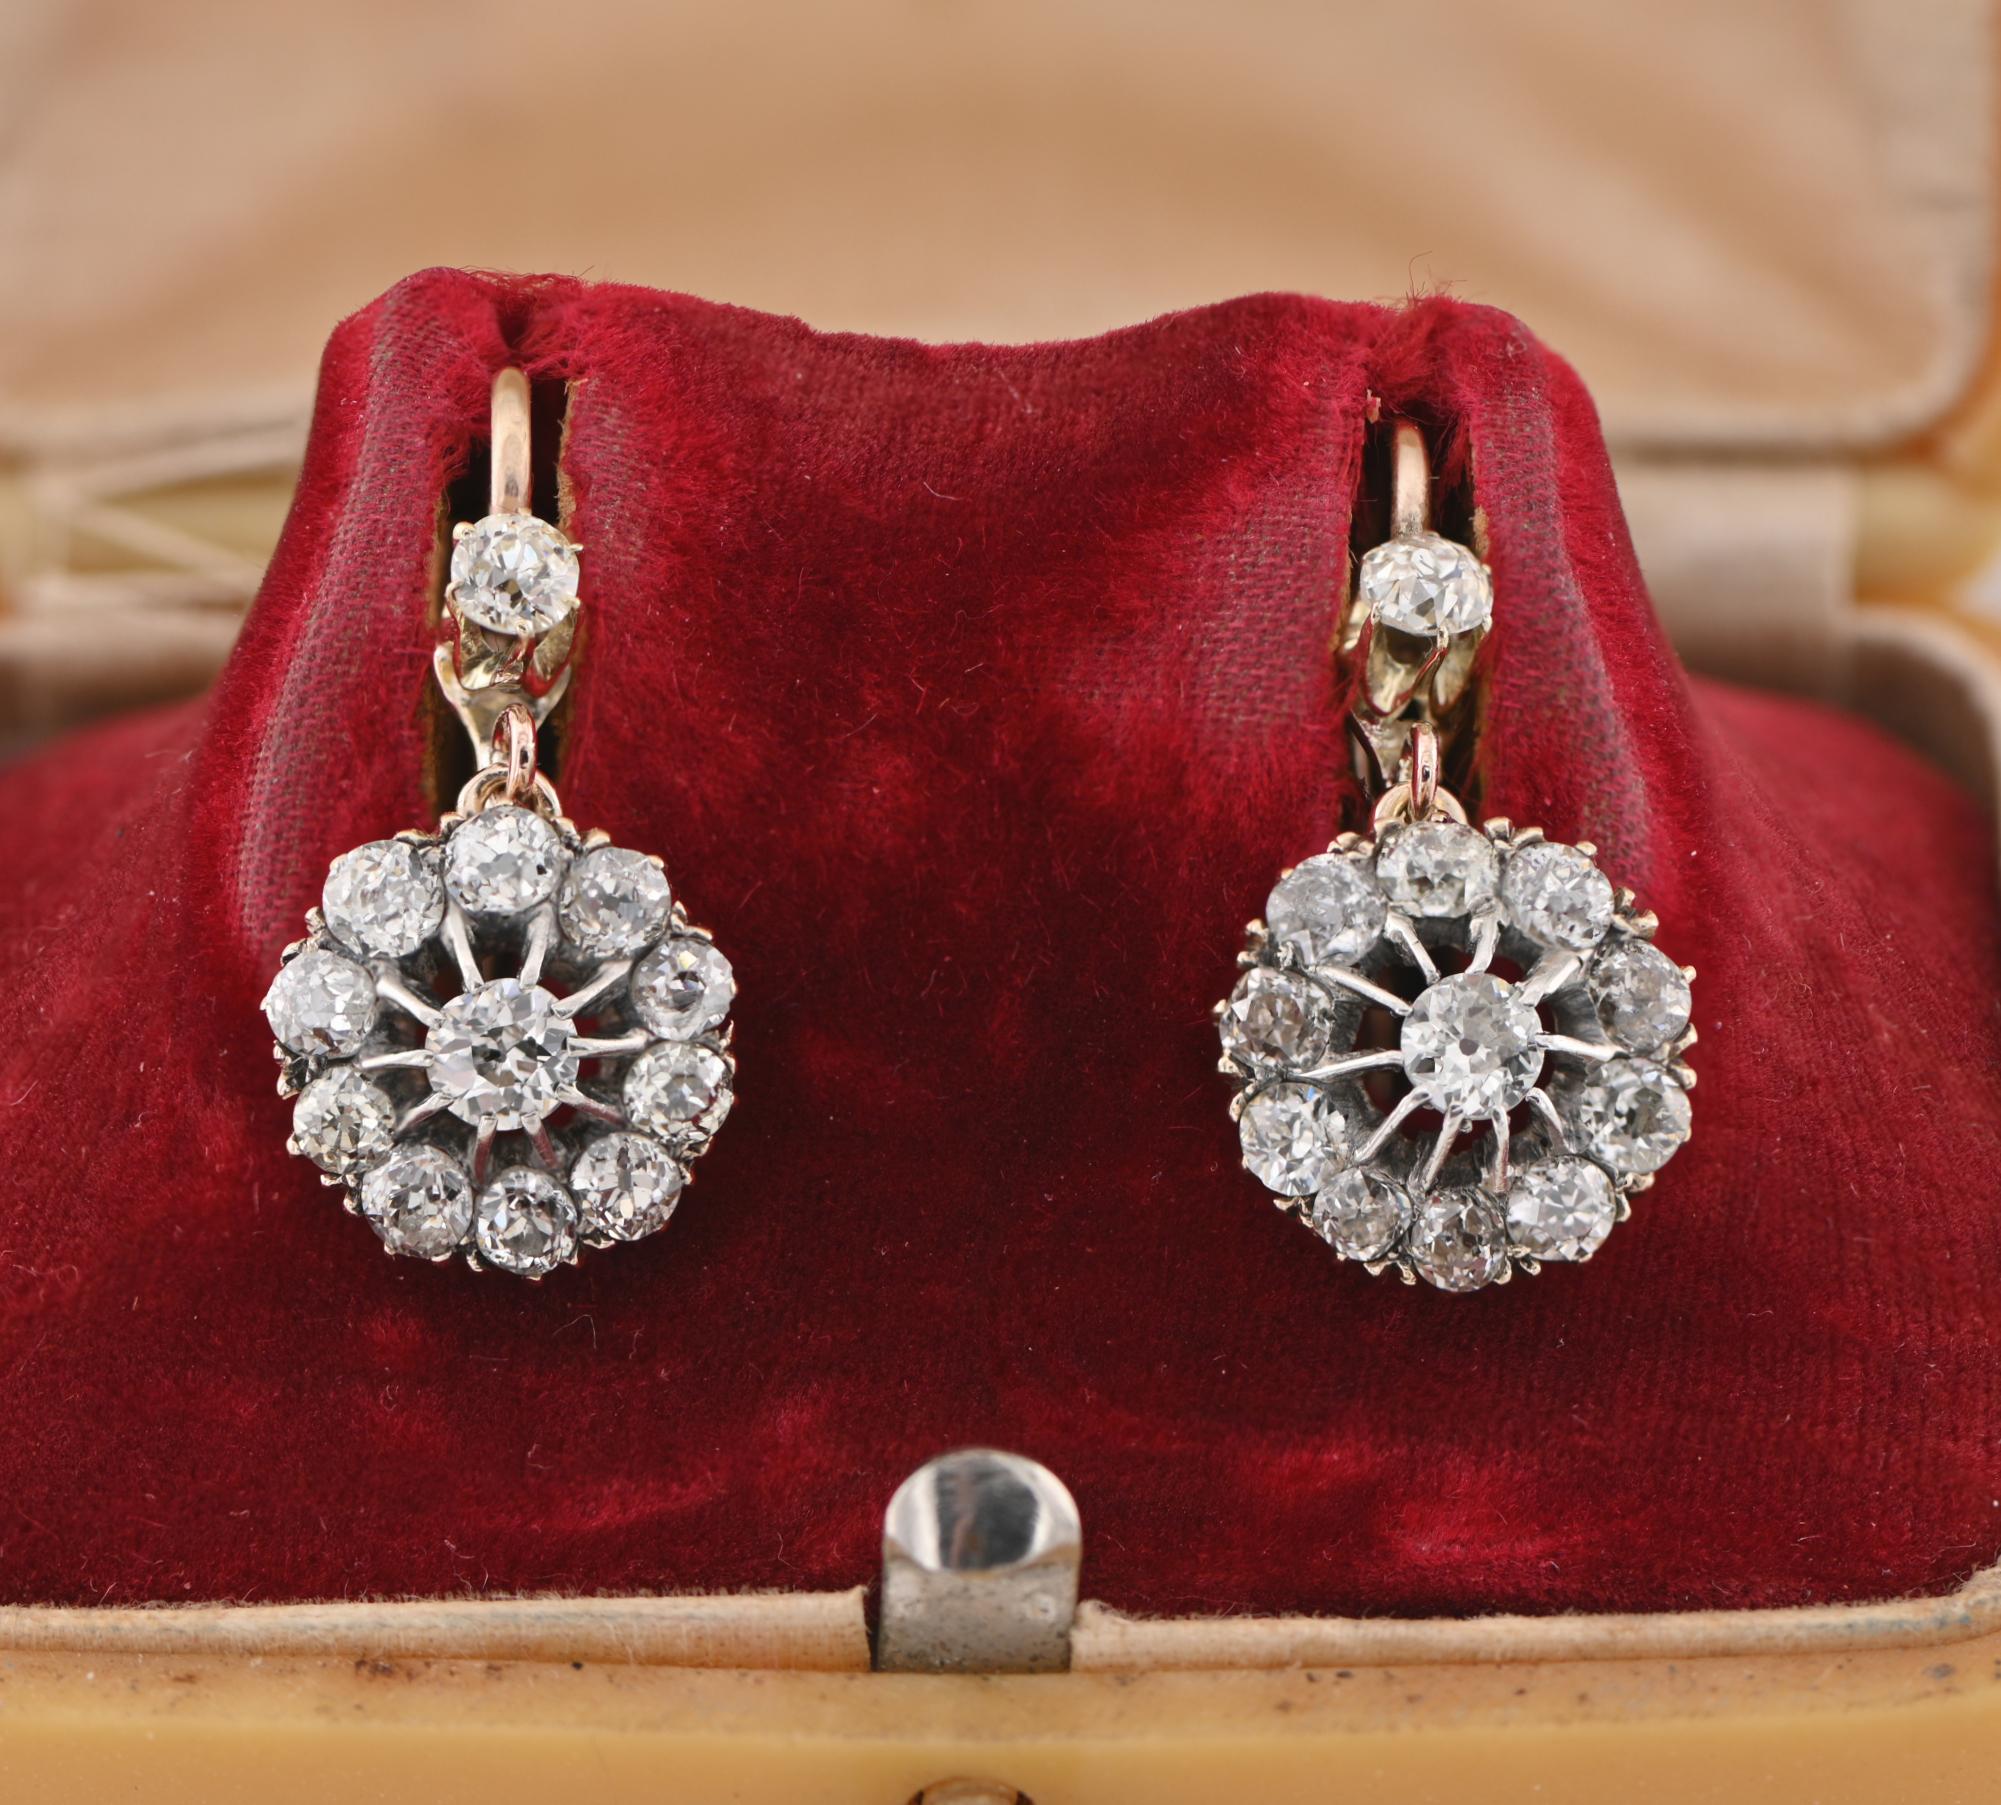 The Sweetest Victorian!
These spectacular Diamond drop earrings are authentic Victorian period, 1890 ca
Boasting the glorious Victorian workmanship, solid 18 KT gold
Statement classy Diamond Daisy drop clusters topped by a single Diamond to